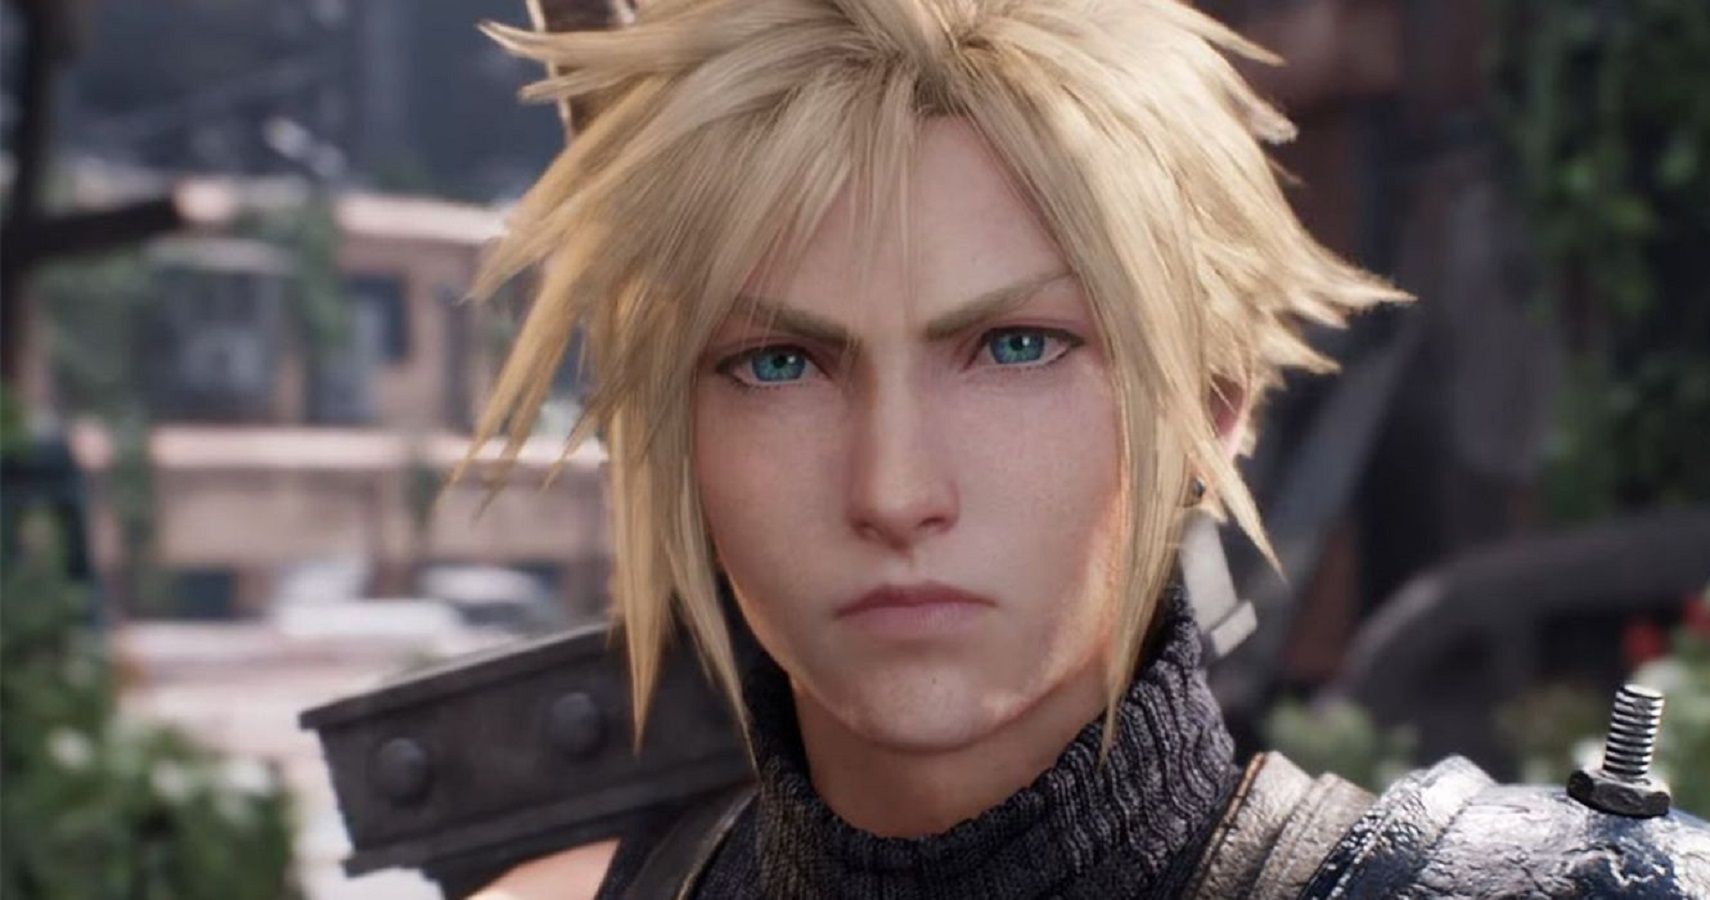 Cloud Strife in FF7 Remake